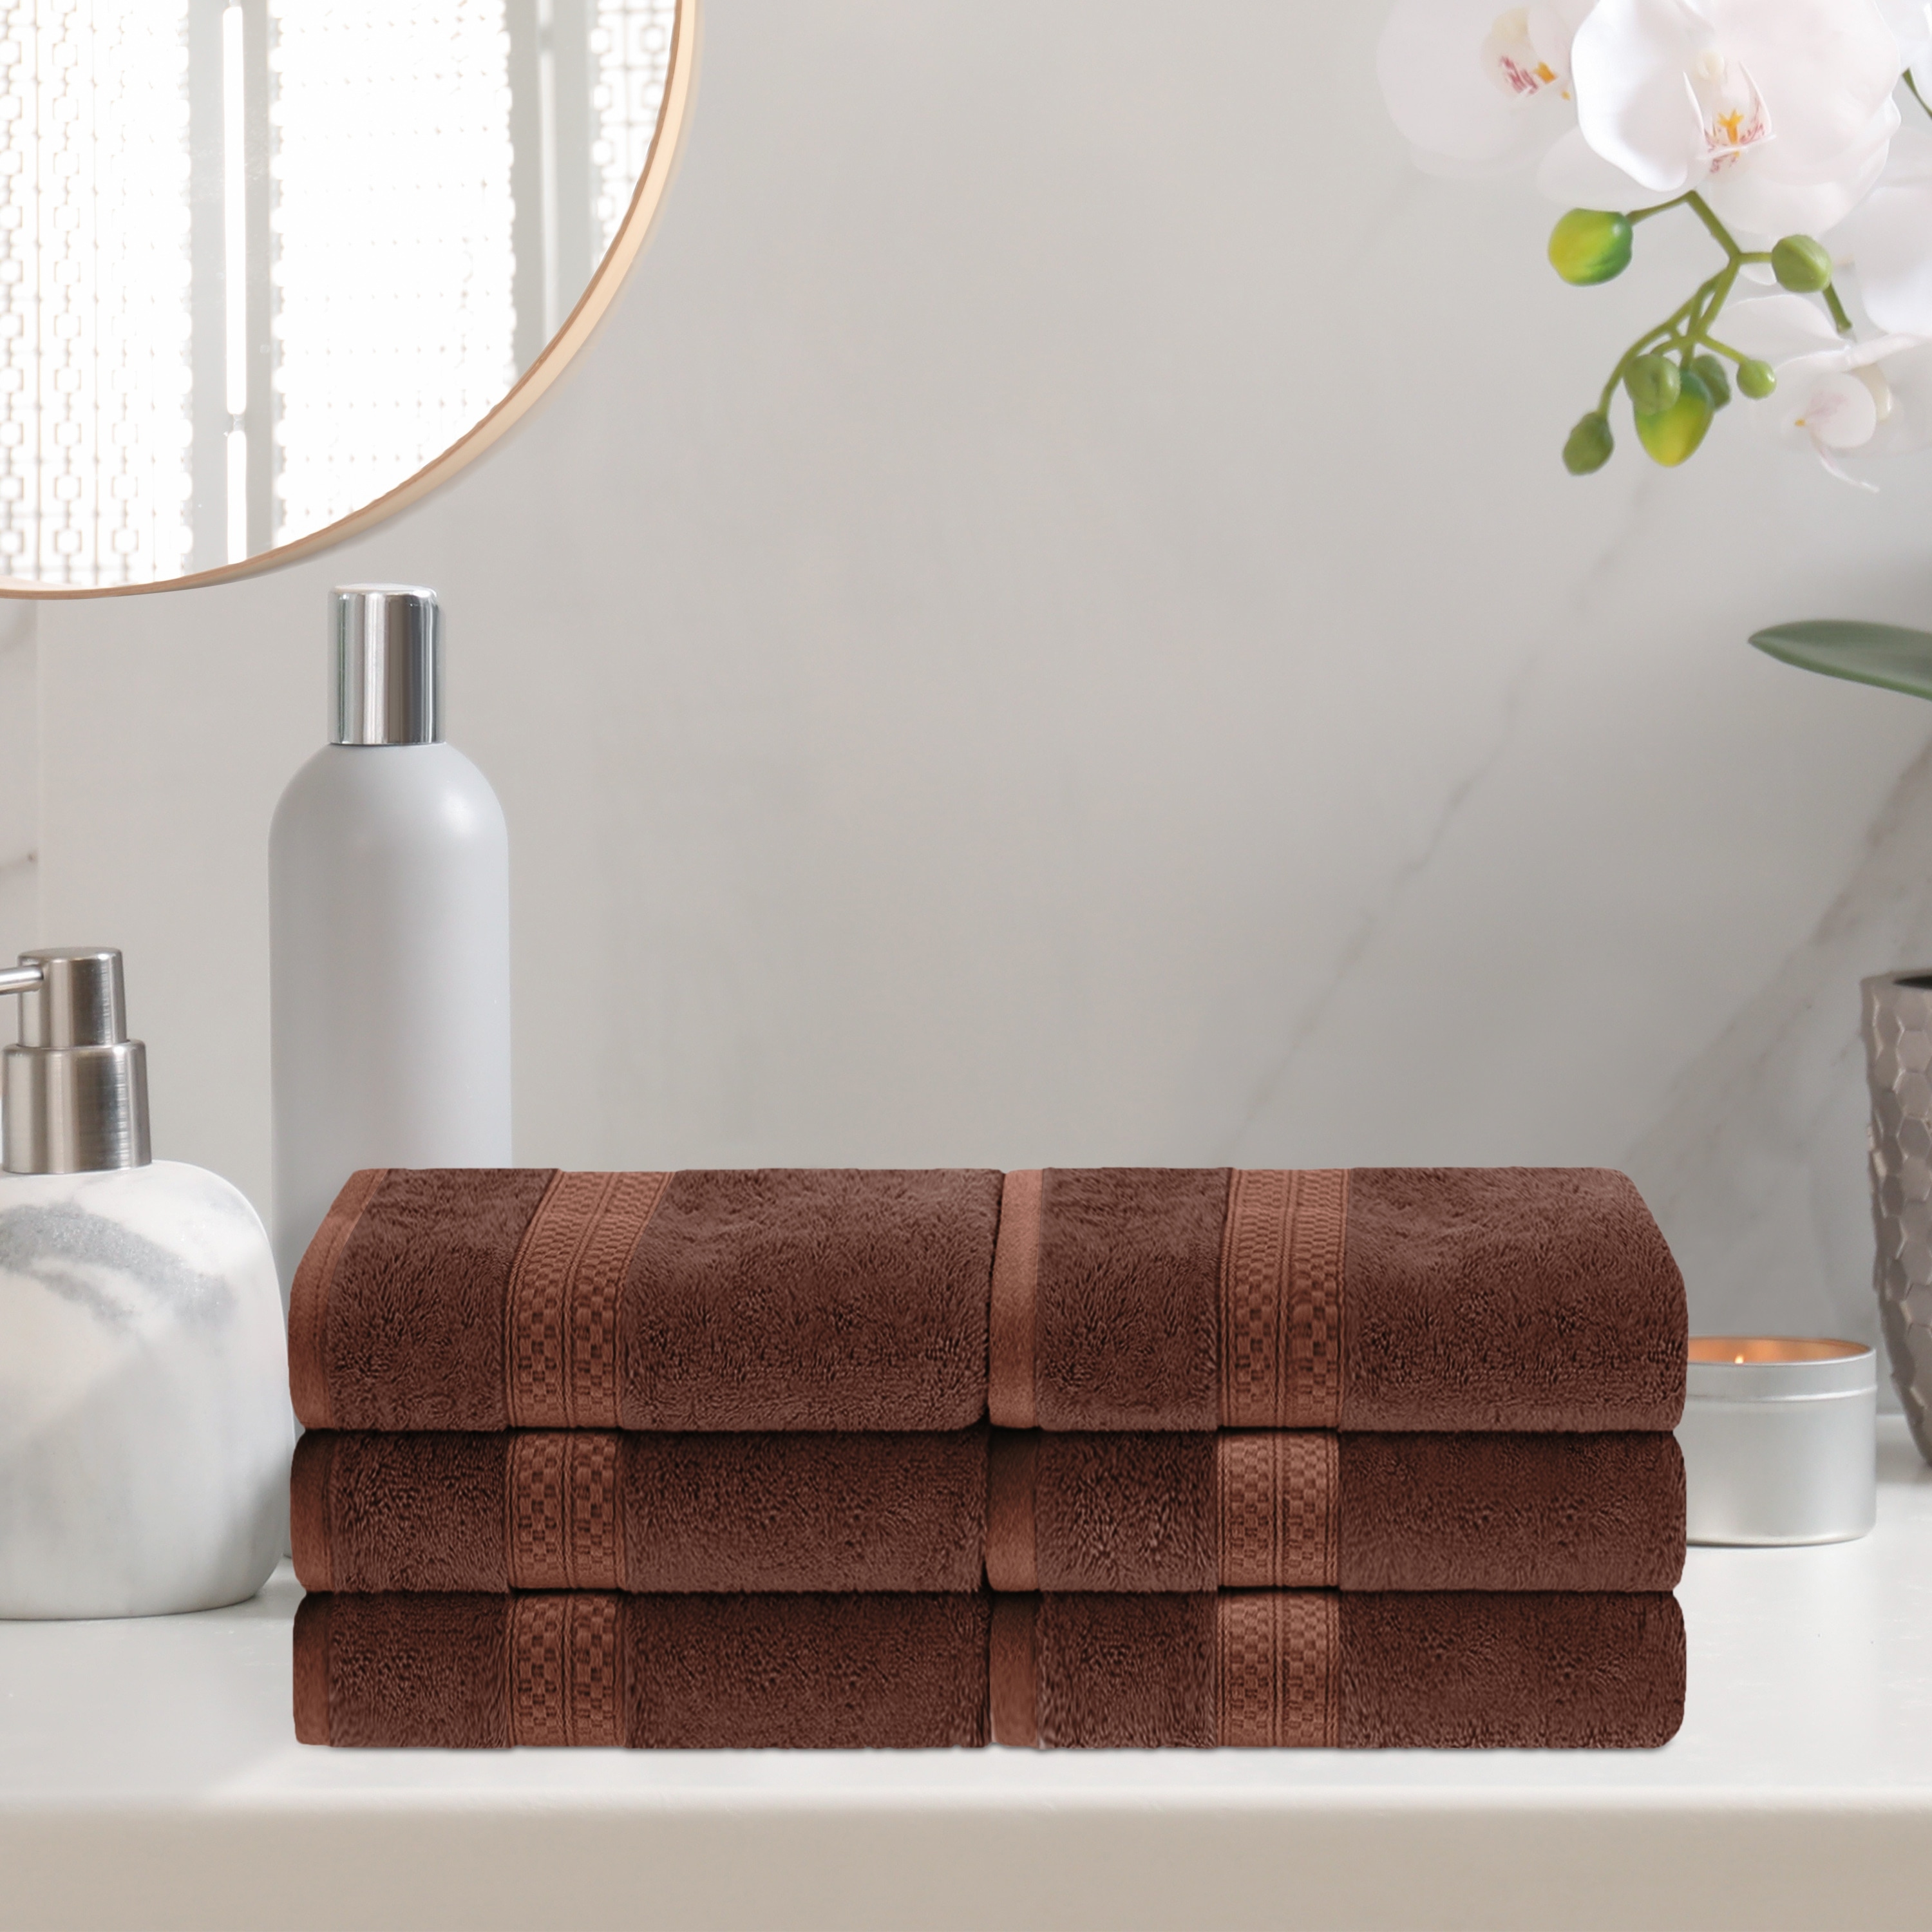 https://ak1.ostkcdn.com/images/products/is/images/direct/83ffff5dca5bb85e240d0fa01a5bc7d4c3e2e0a9/Miranda-Haus-Rayon-from-Bamboo-and-Cotton-Hand-Towel-Set-%28Set-of-6%29.jpg